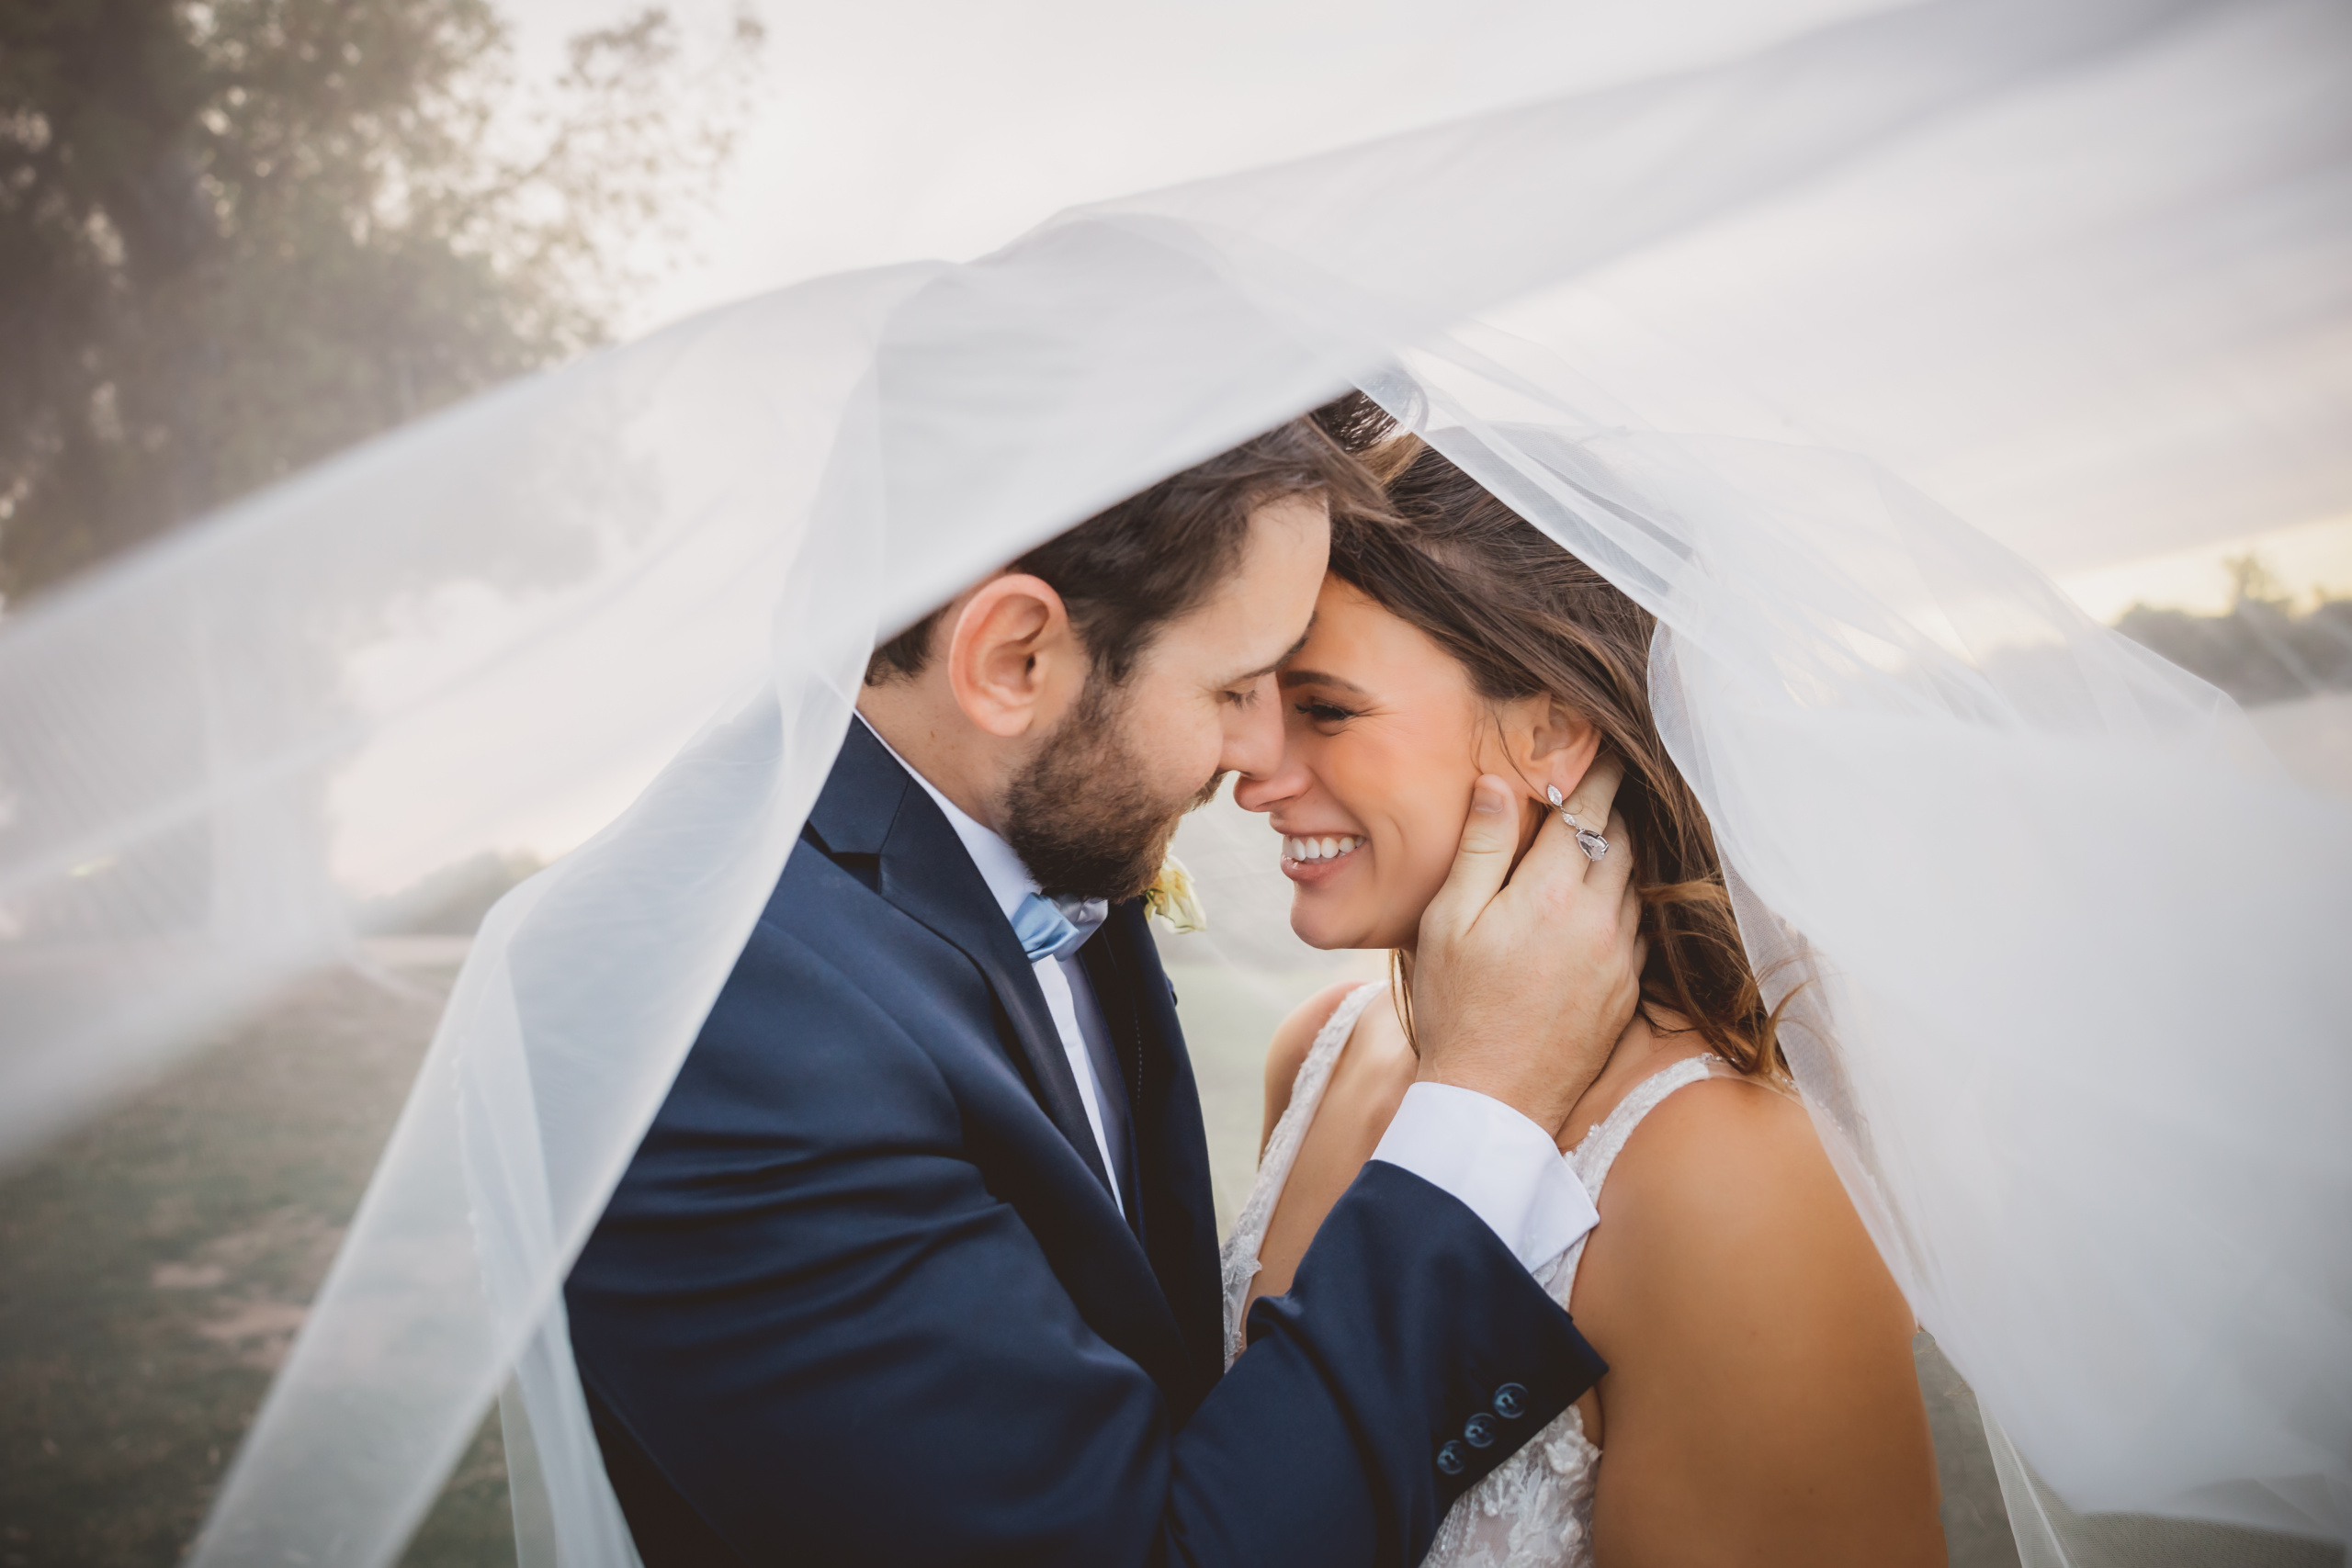 Bride and Groom sharing a moment under the veil captured by AZ Wedding Photographer